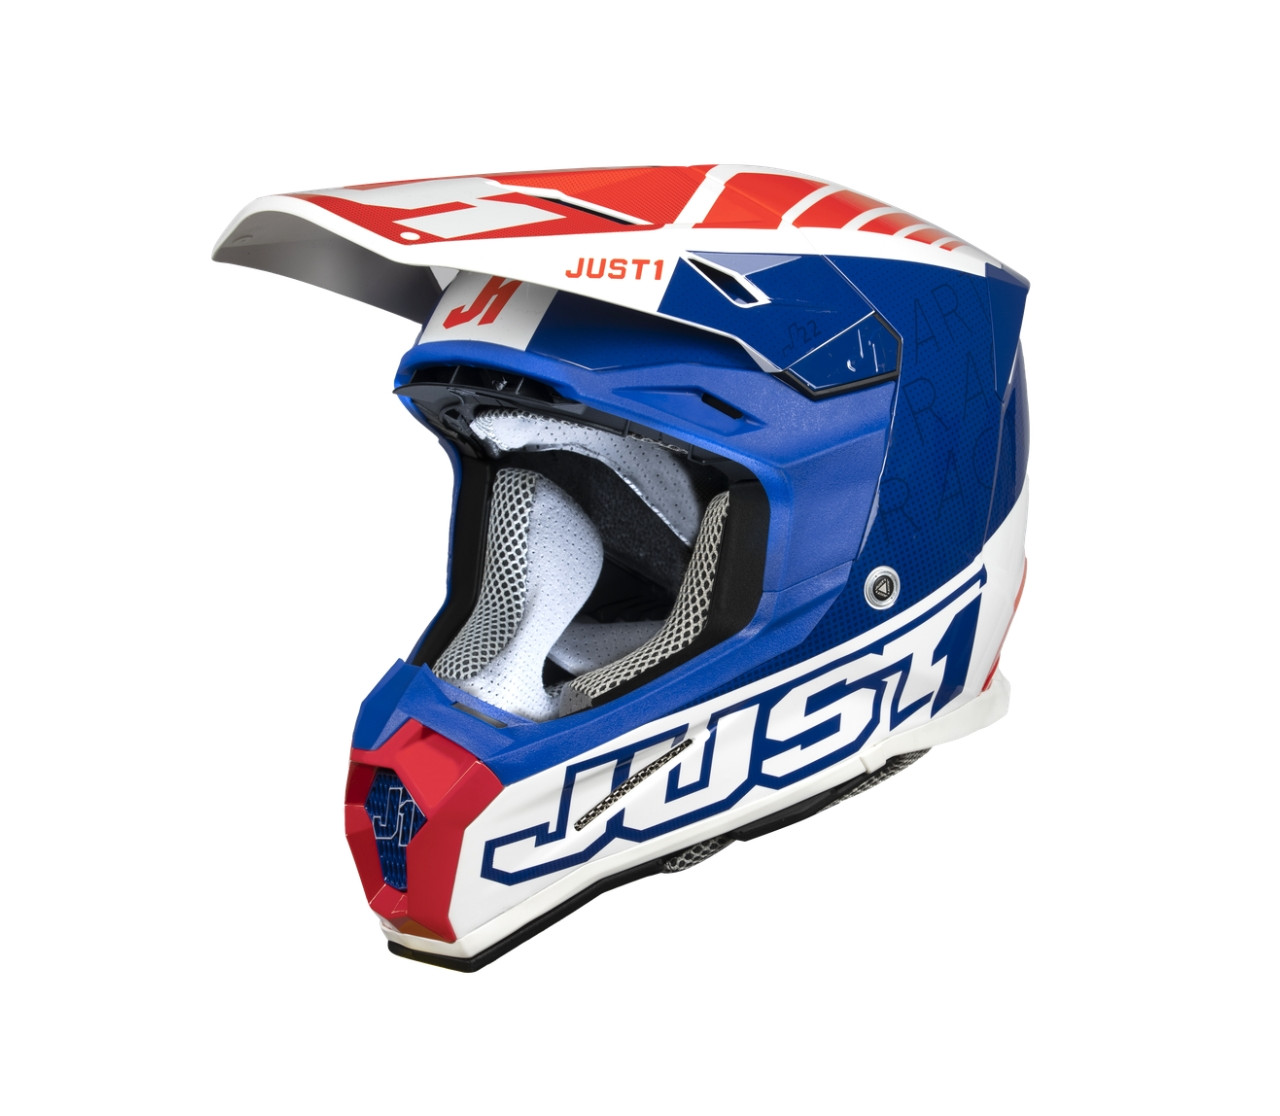 JUST1 J22-F DYNAMO BLUE RED WHITE